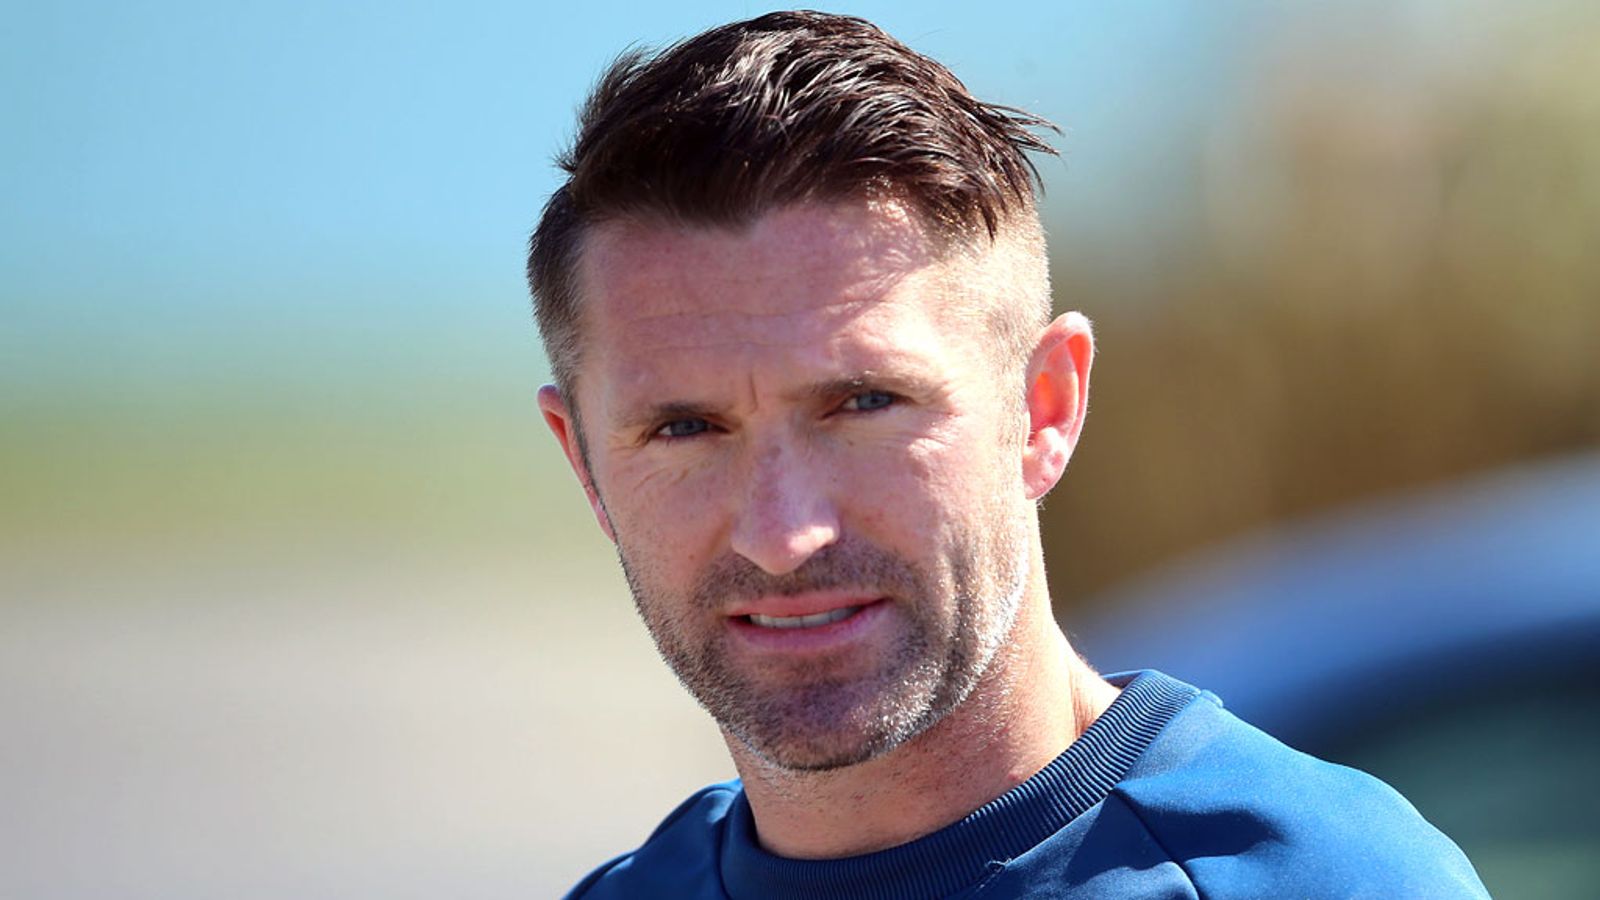 Robbie Keane raring to go despite 'hectic' few days including birth of